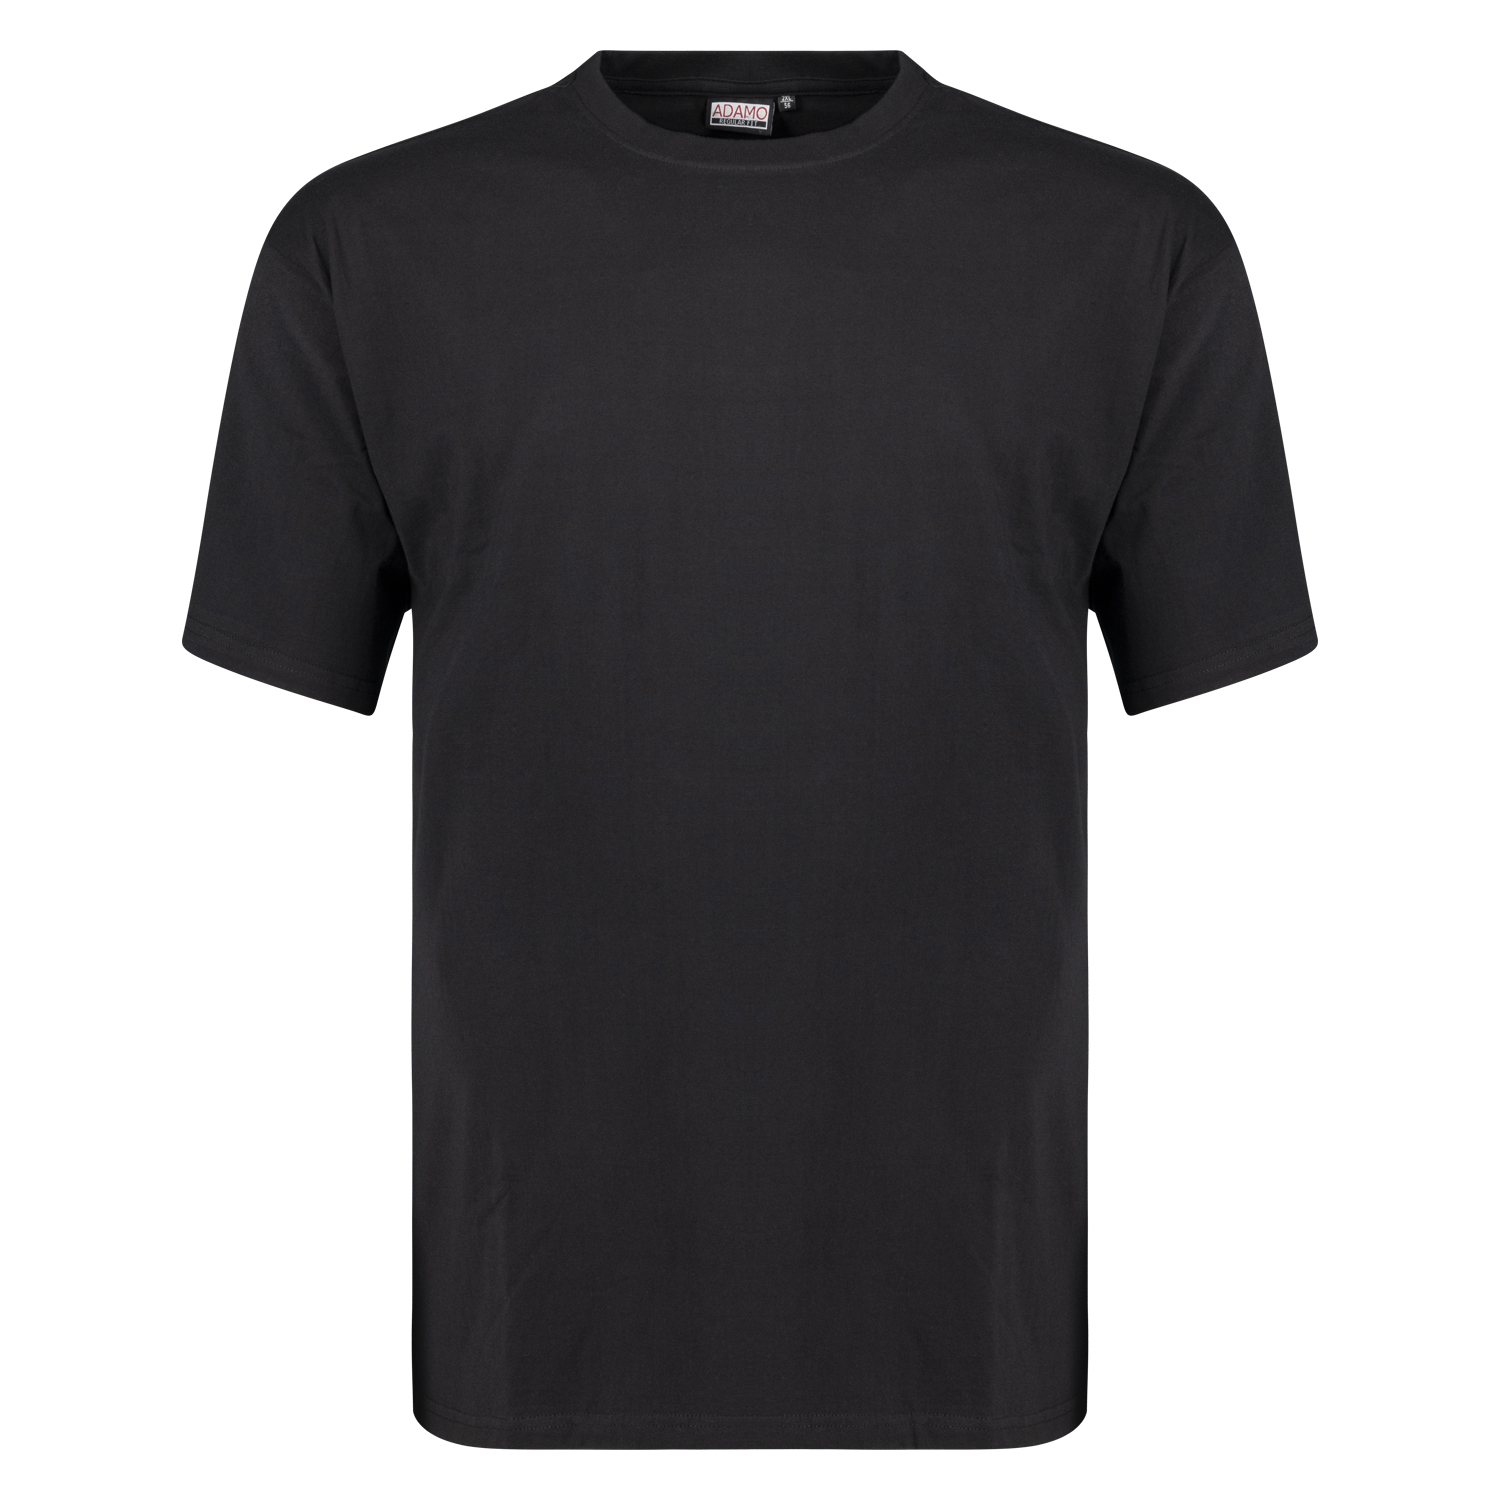 T-shirt Regular Fit in black series Bud by Adamo for men up to oversize 12XL - Heavy Jersey